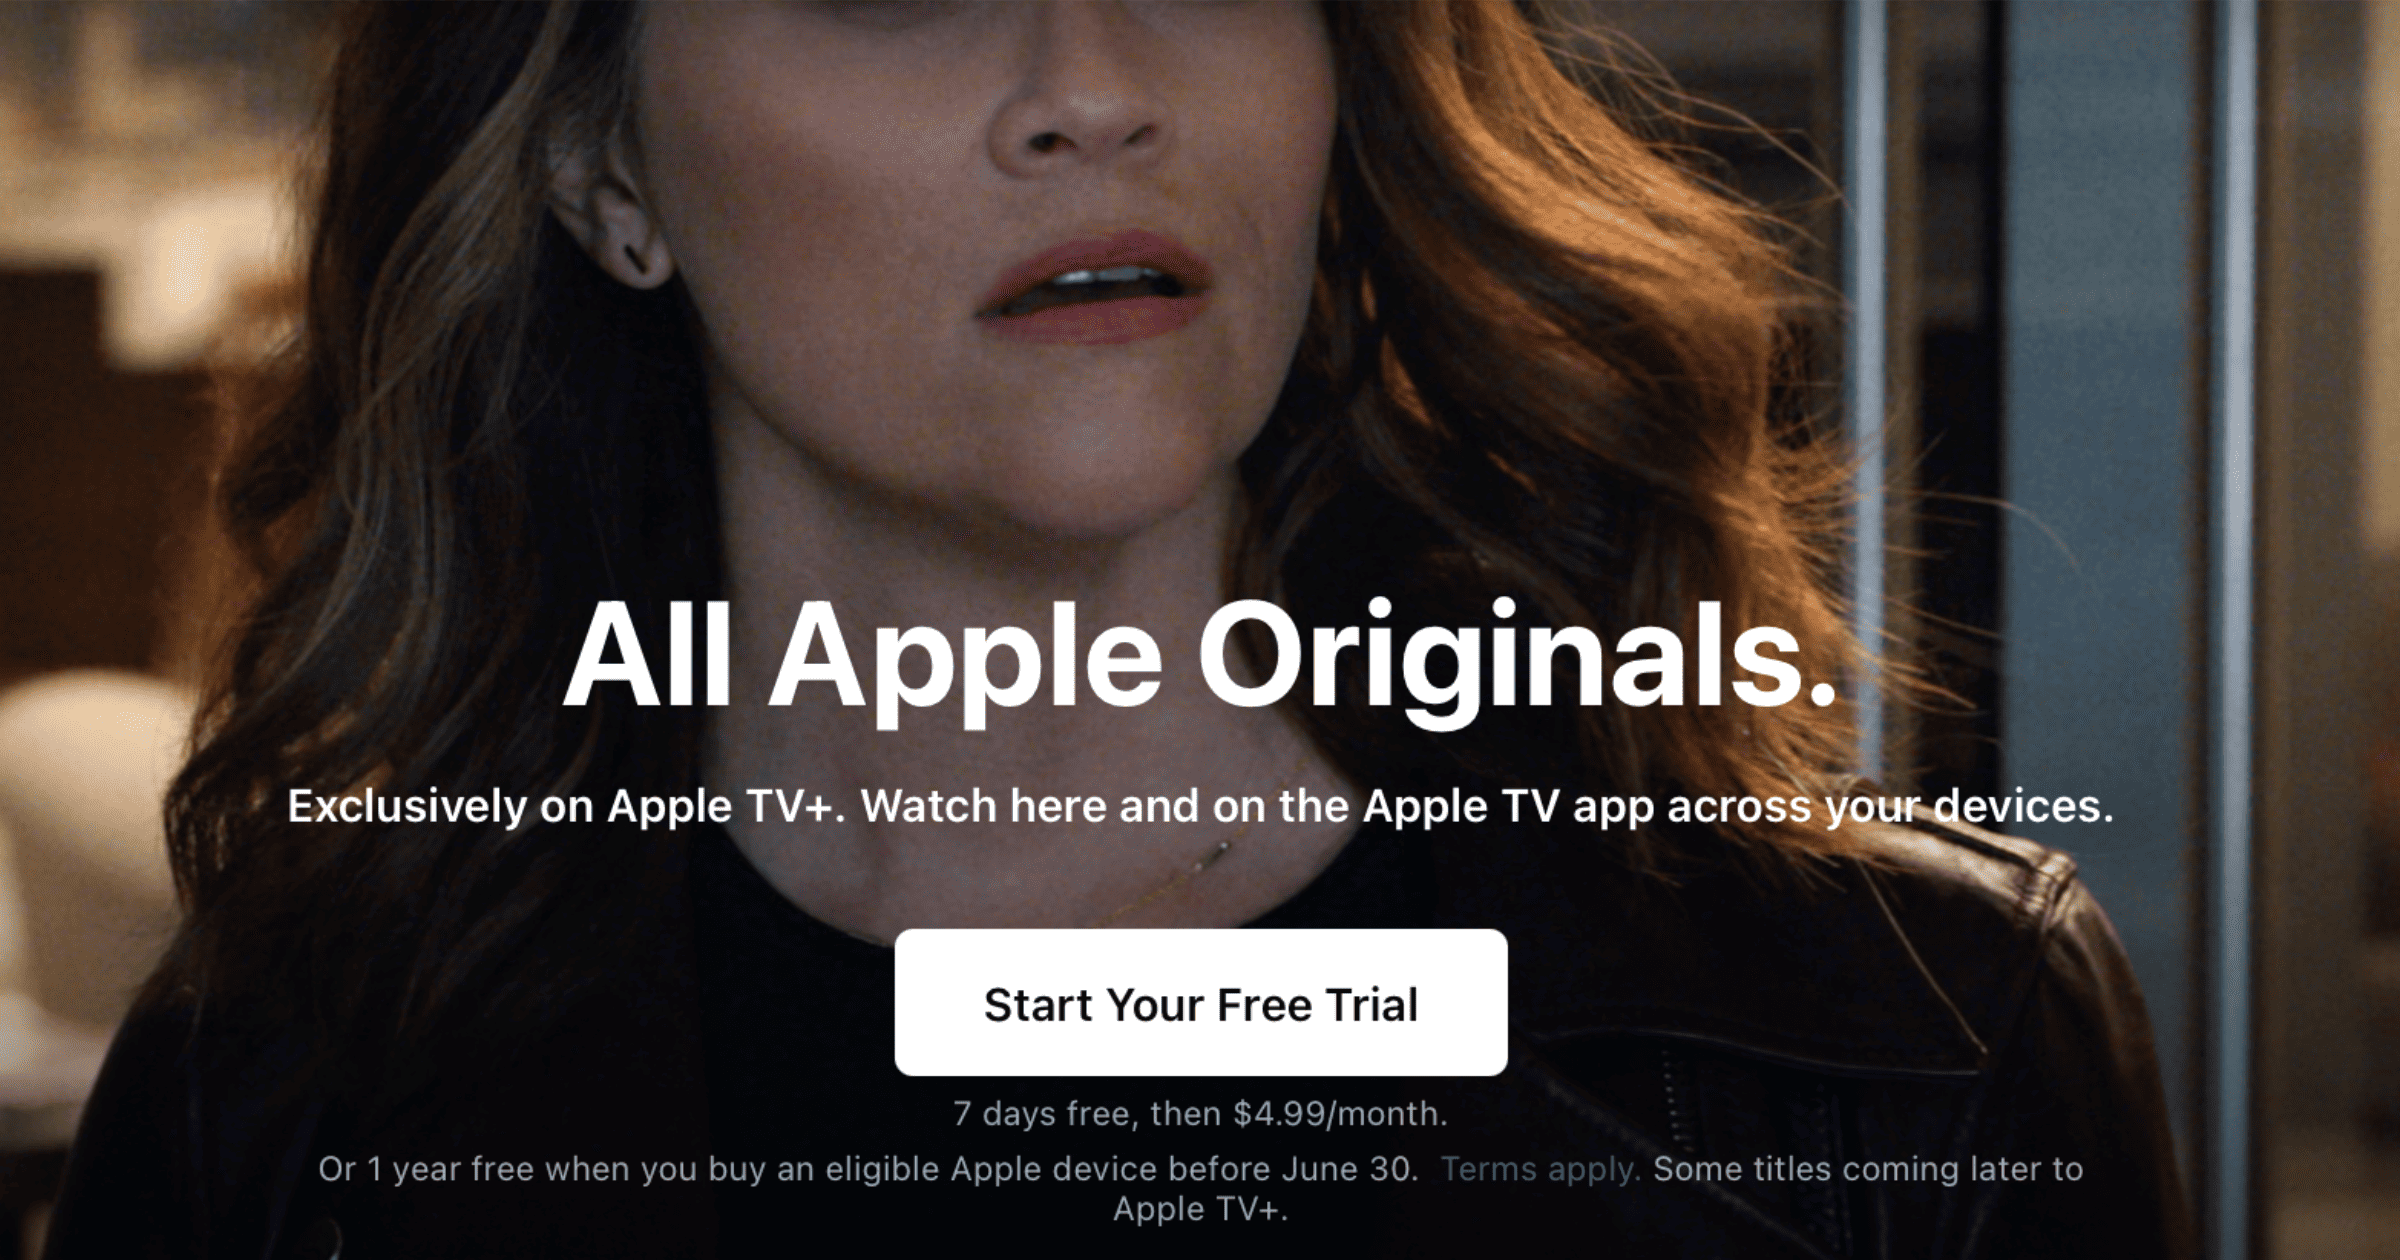 Last Day to Get Apple TV+ Free for a Year With a New Device